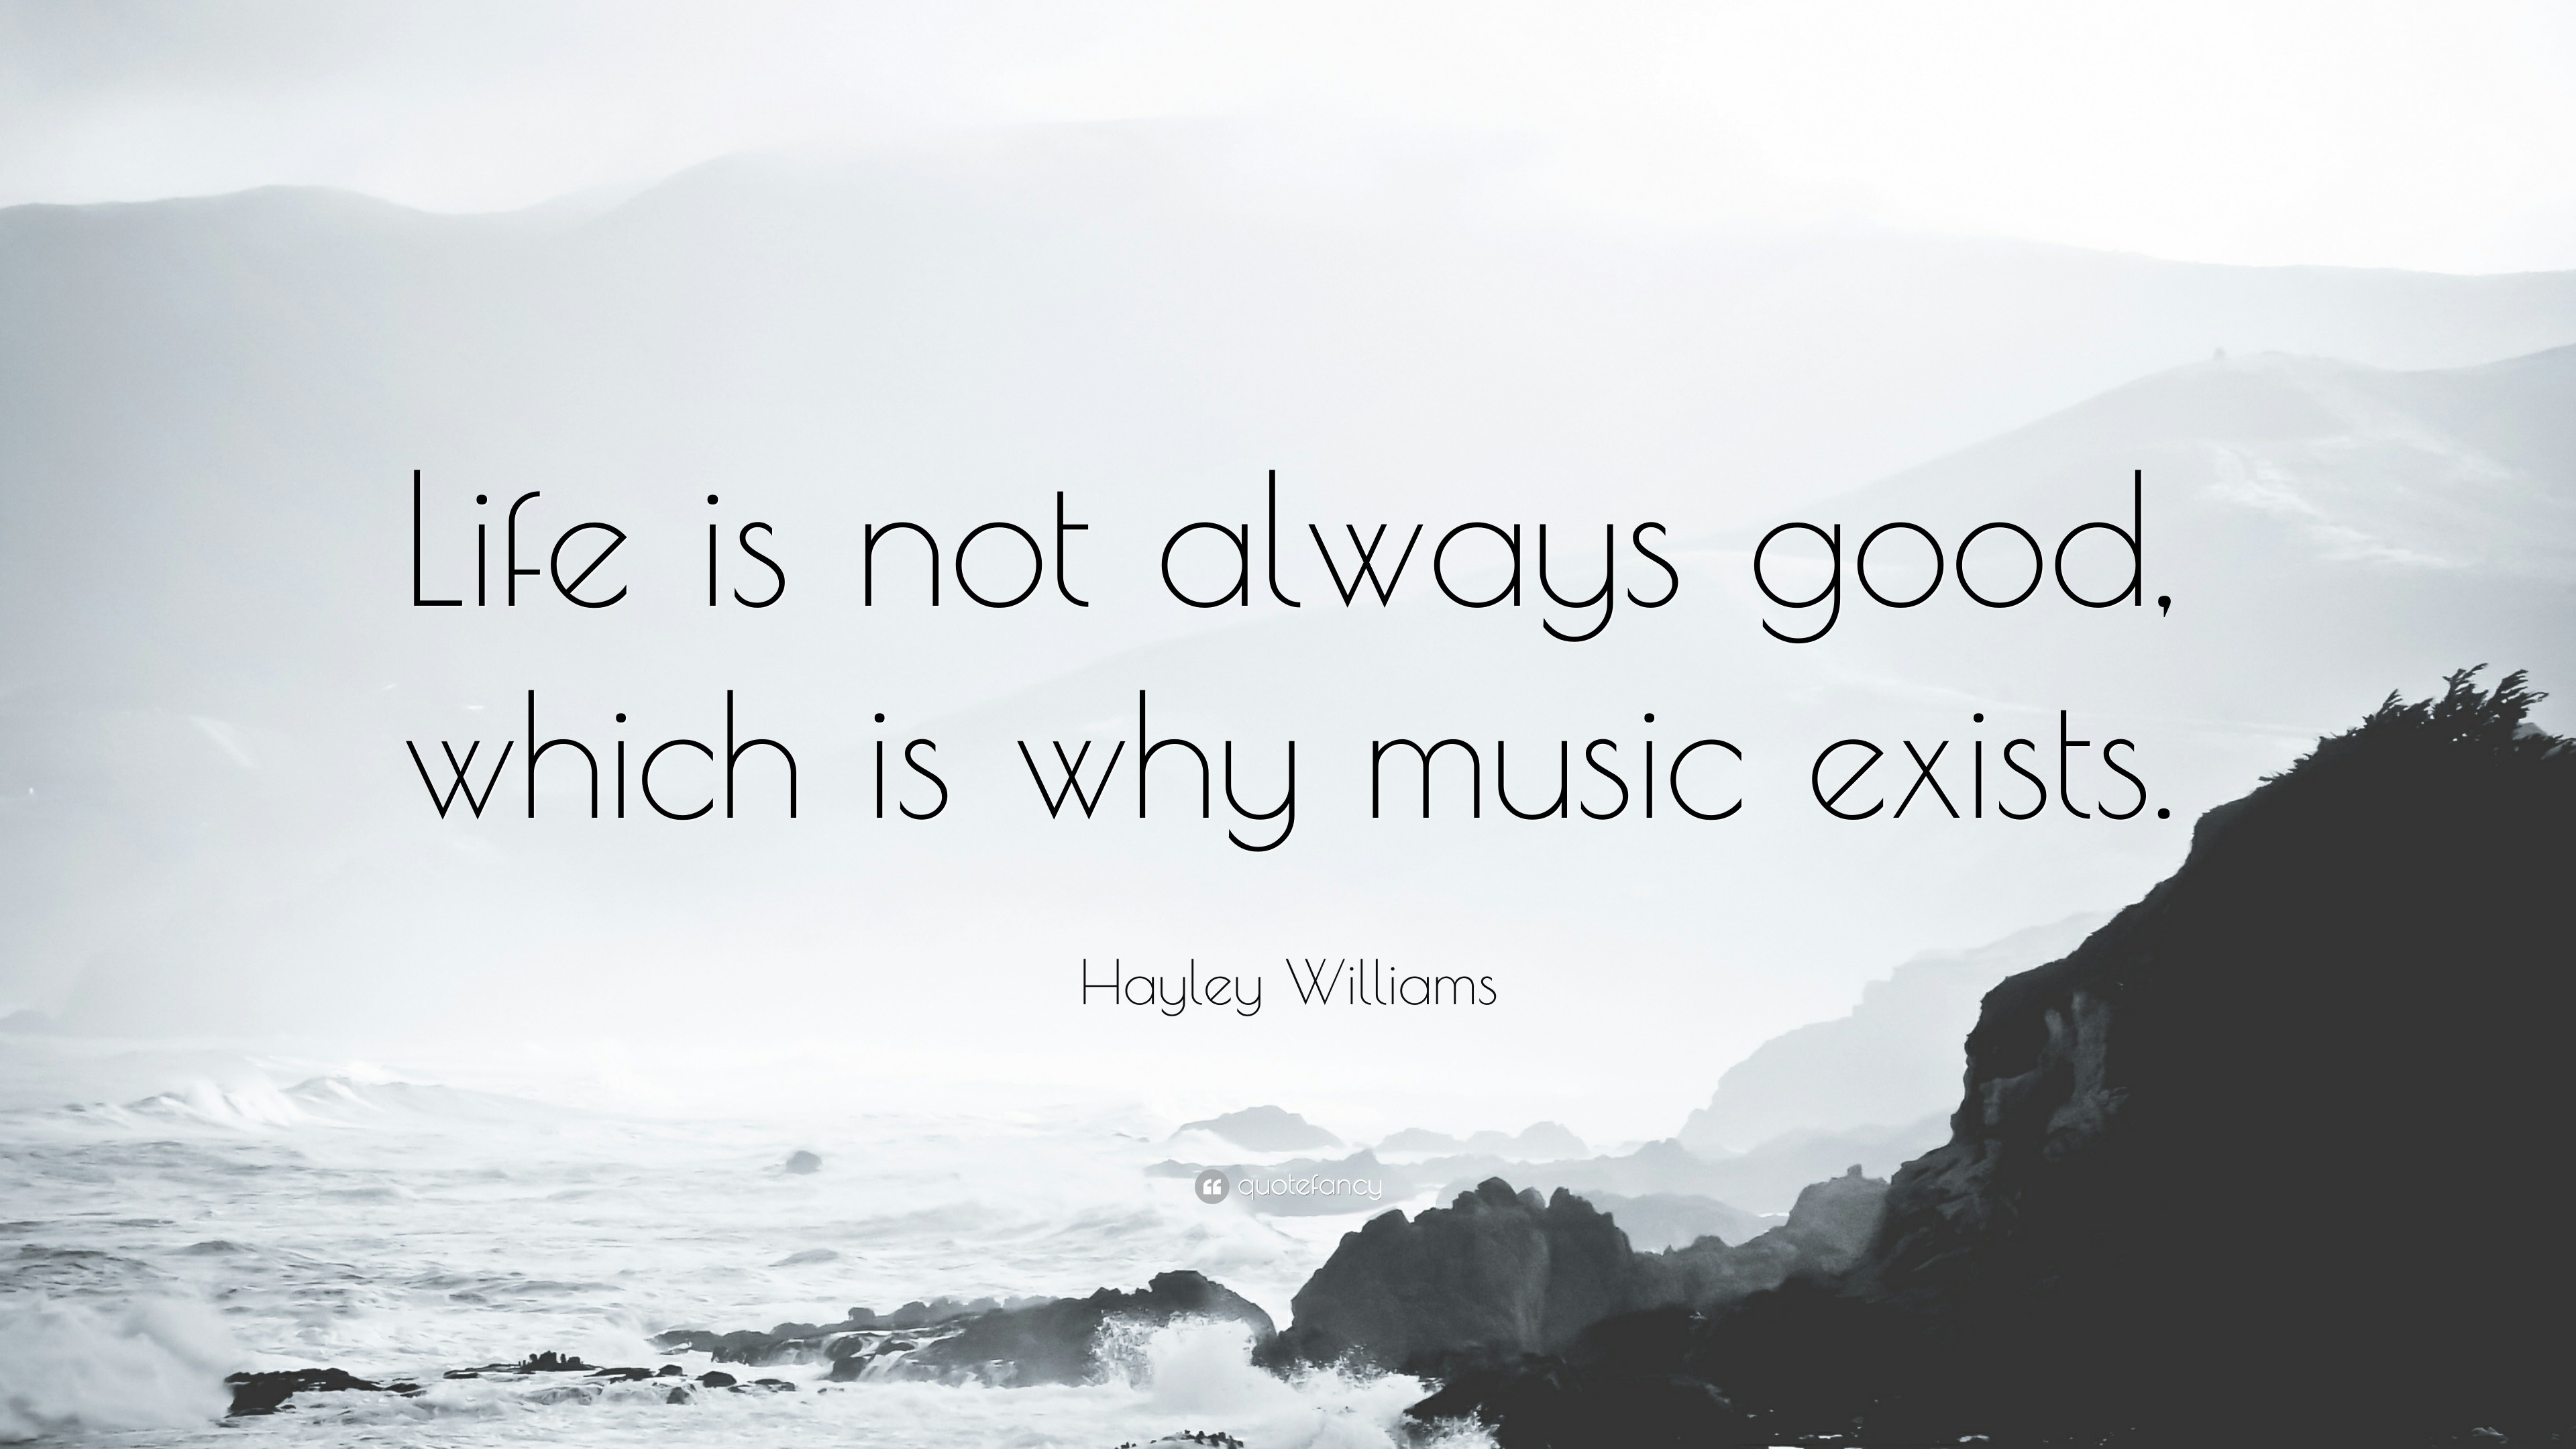 Hayley Williams Quote “Life is not always good which is why music exists